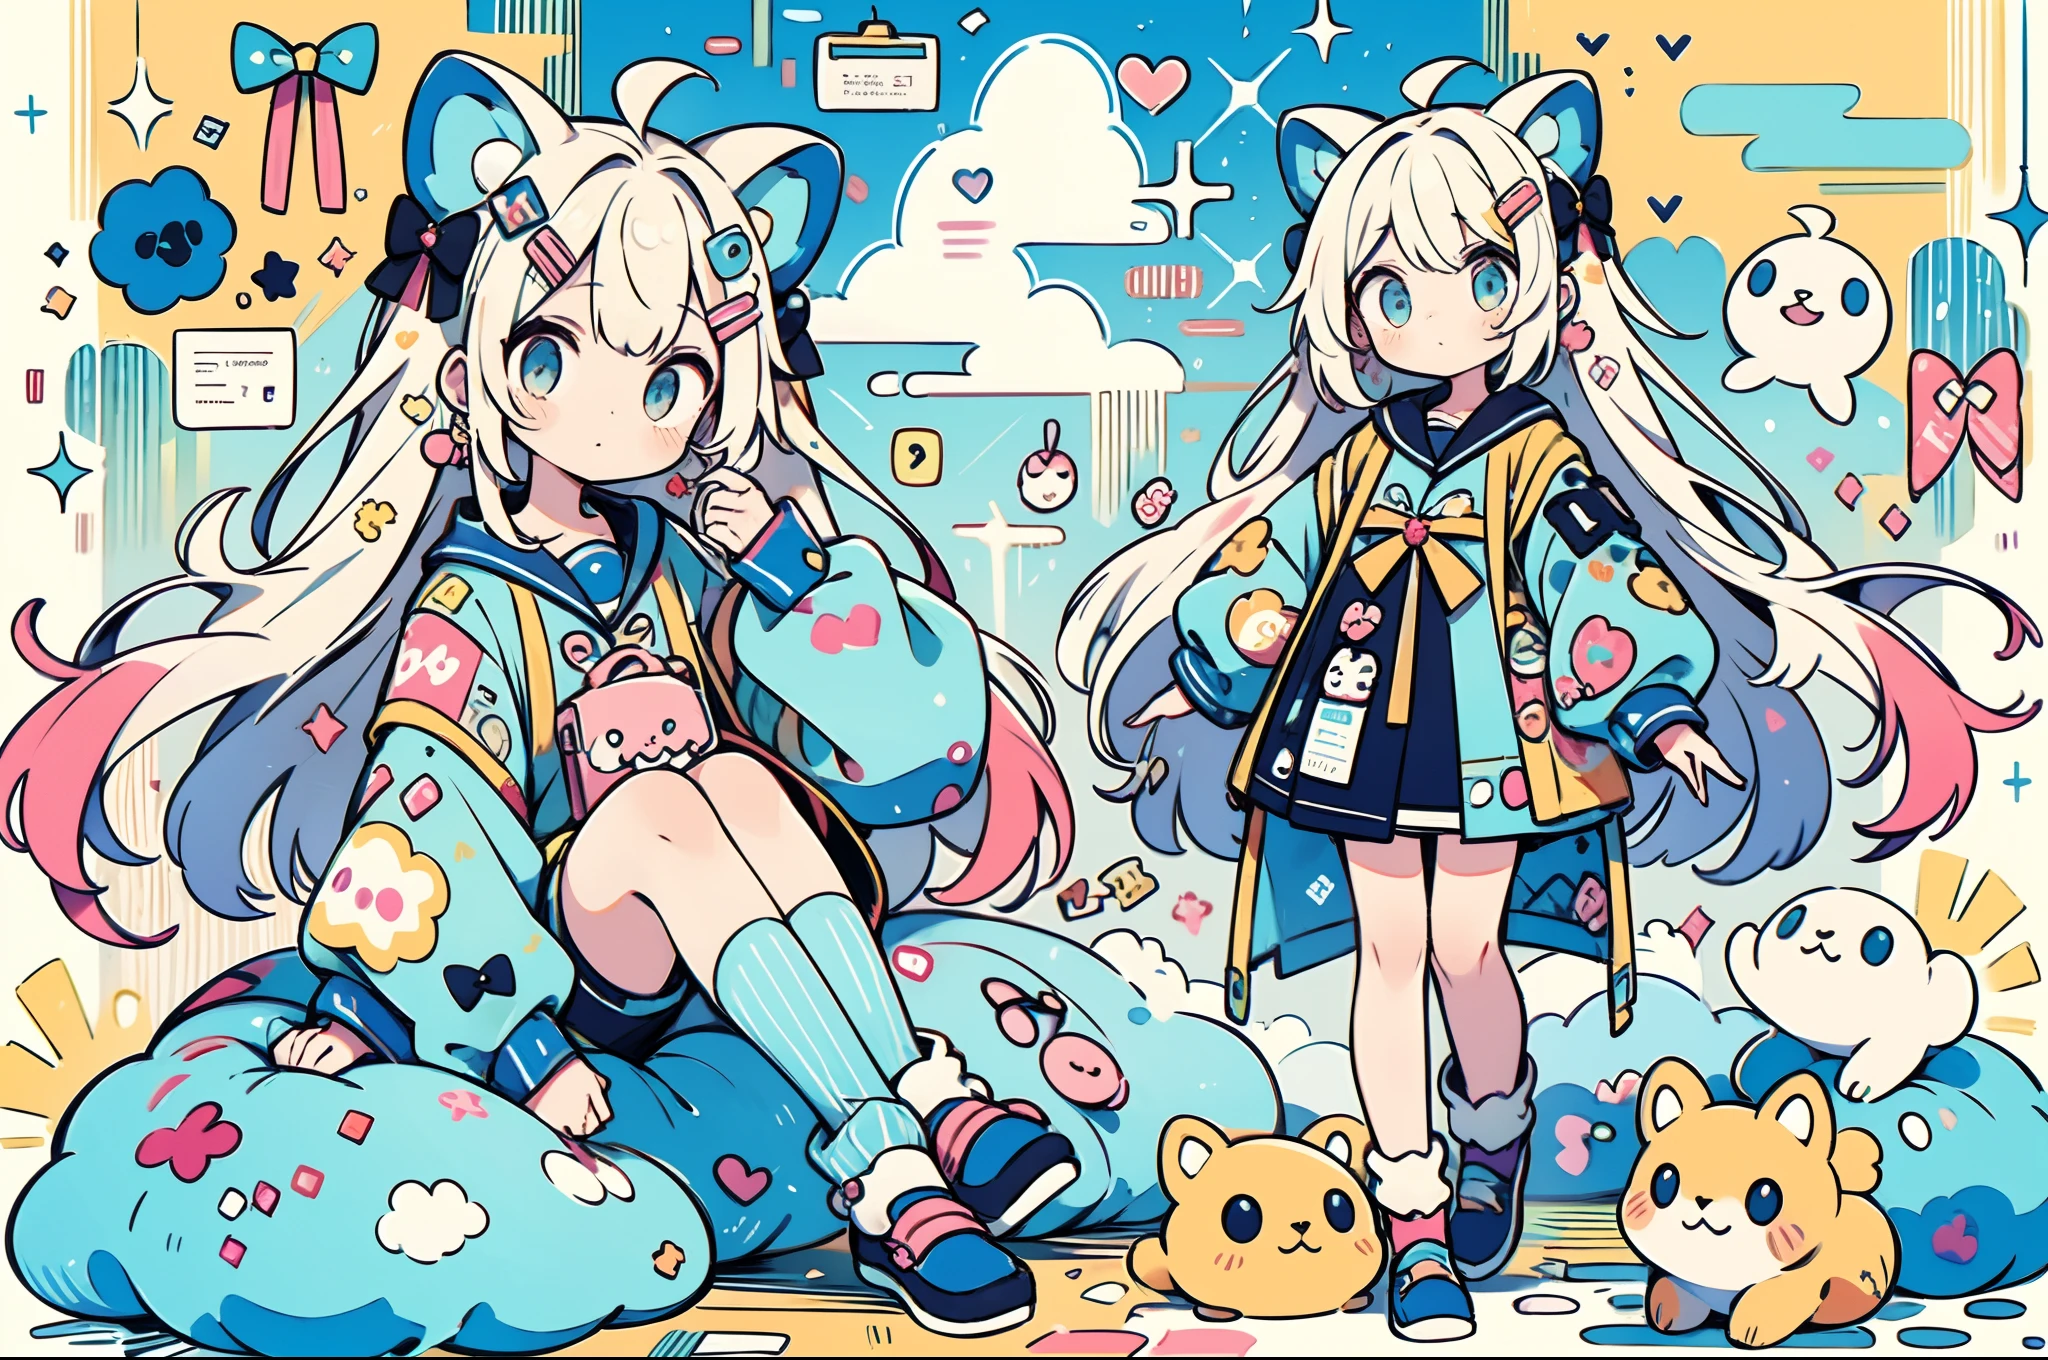 "kawaii, Cute, ((full body Esbian、Float on your side)), Adorable girl in pink, yellow, and baby blue color scheme. She wears sky-themed clothing with clouds and sky motifs. Her outfit is fluffy and soft, With decora accessories like hair clips. She embodies a vibrant and trendy Harajuku fashion style."[[[The body peels in a strange direction]]]